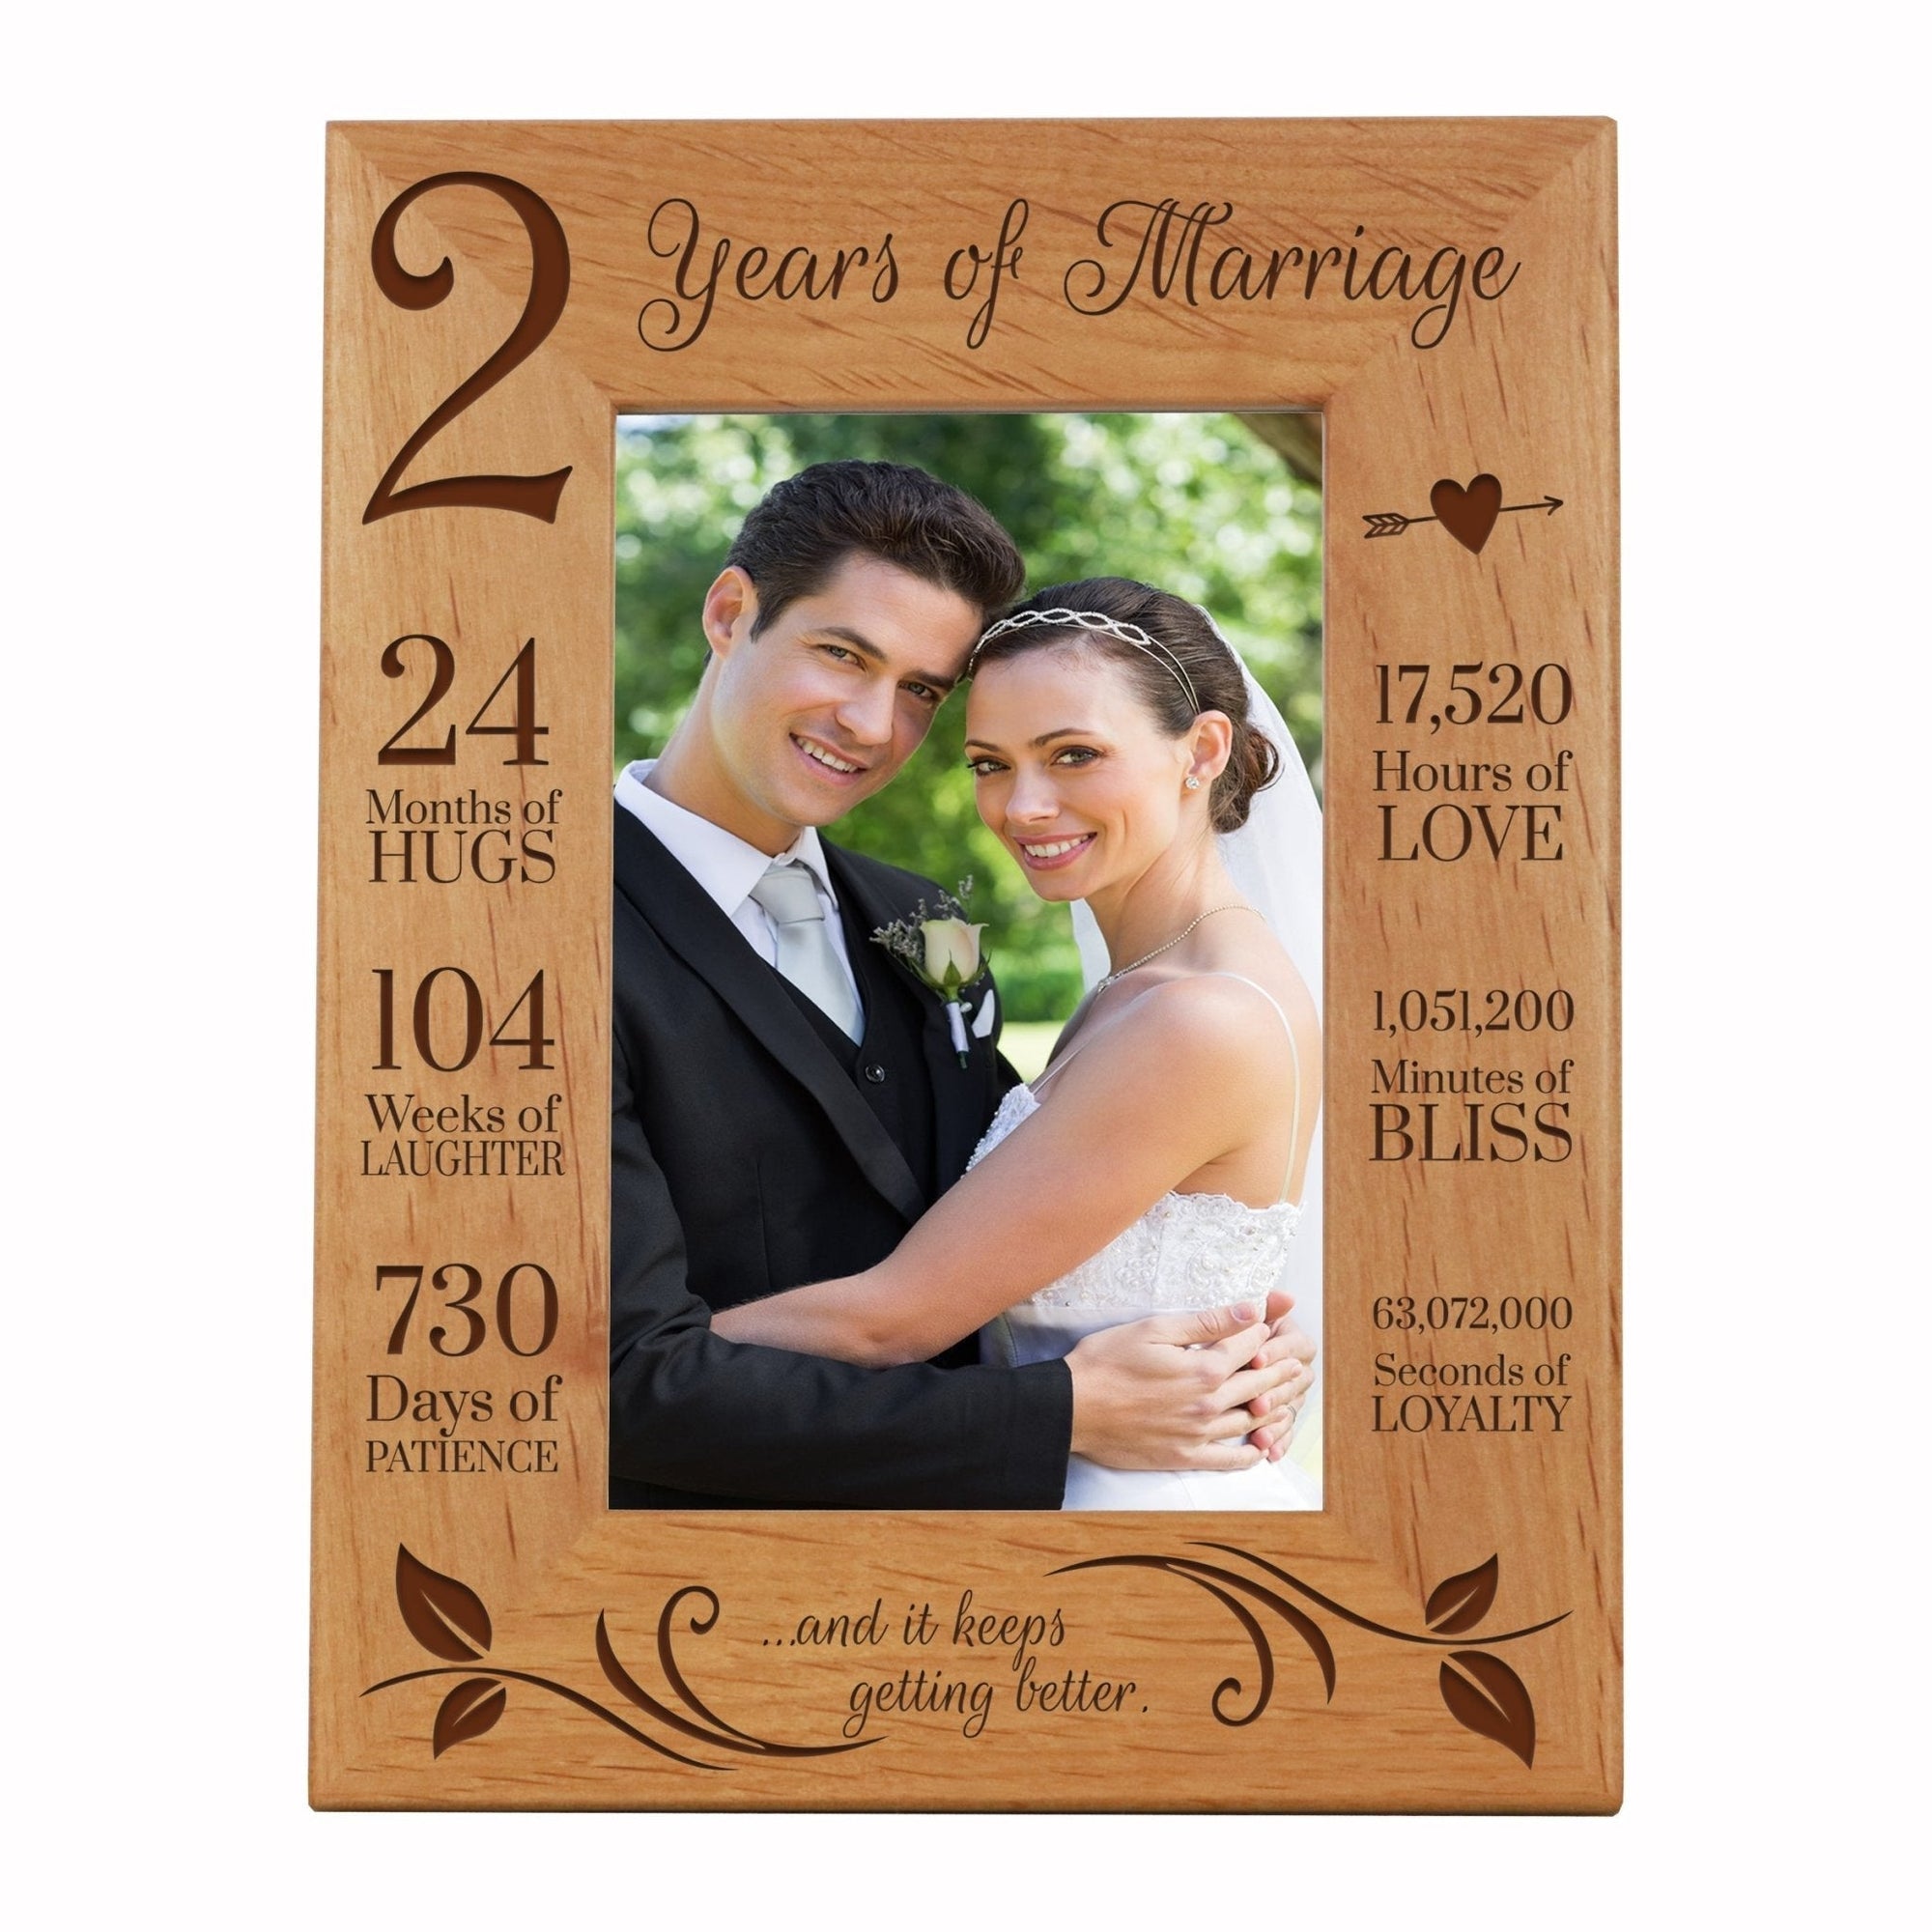 Engraved 2nd Anniversary Picture Frame Gift for Couples - Keeps Getting Better - LifeSong Milestones